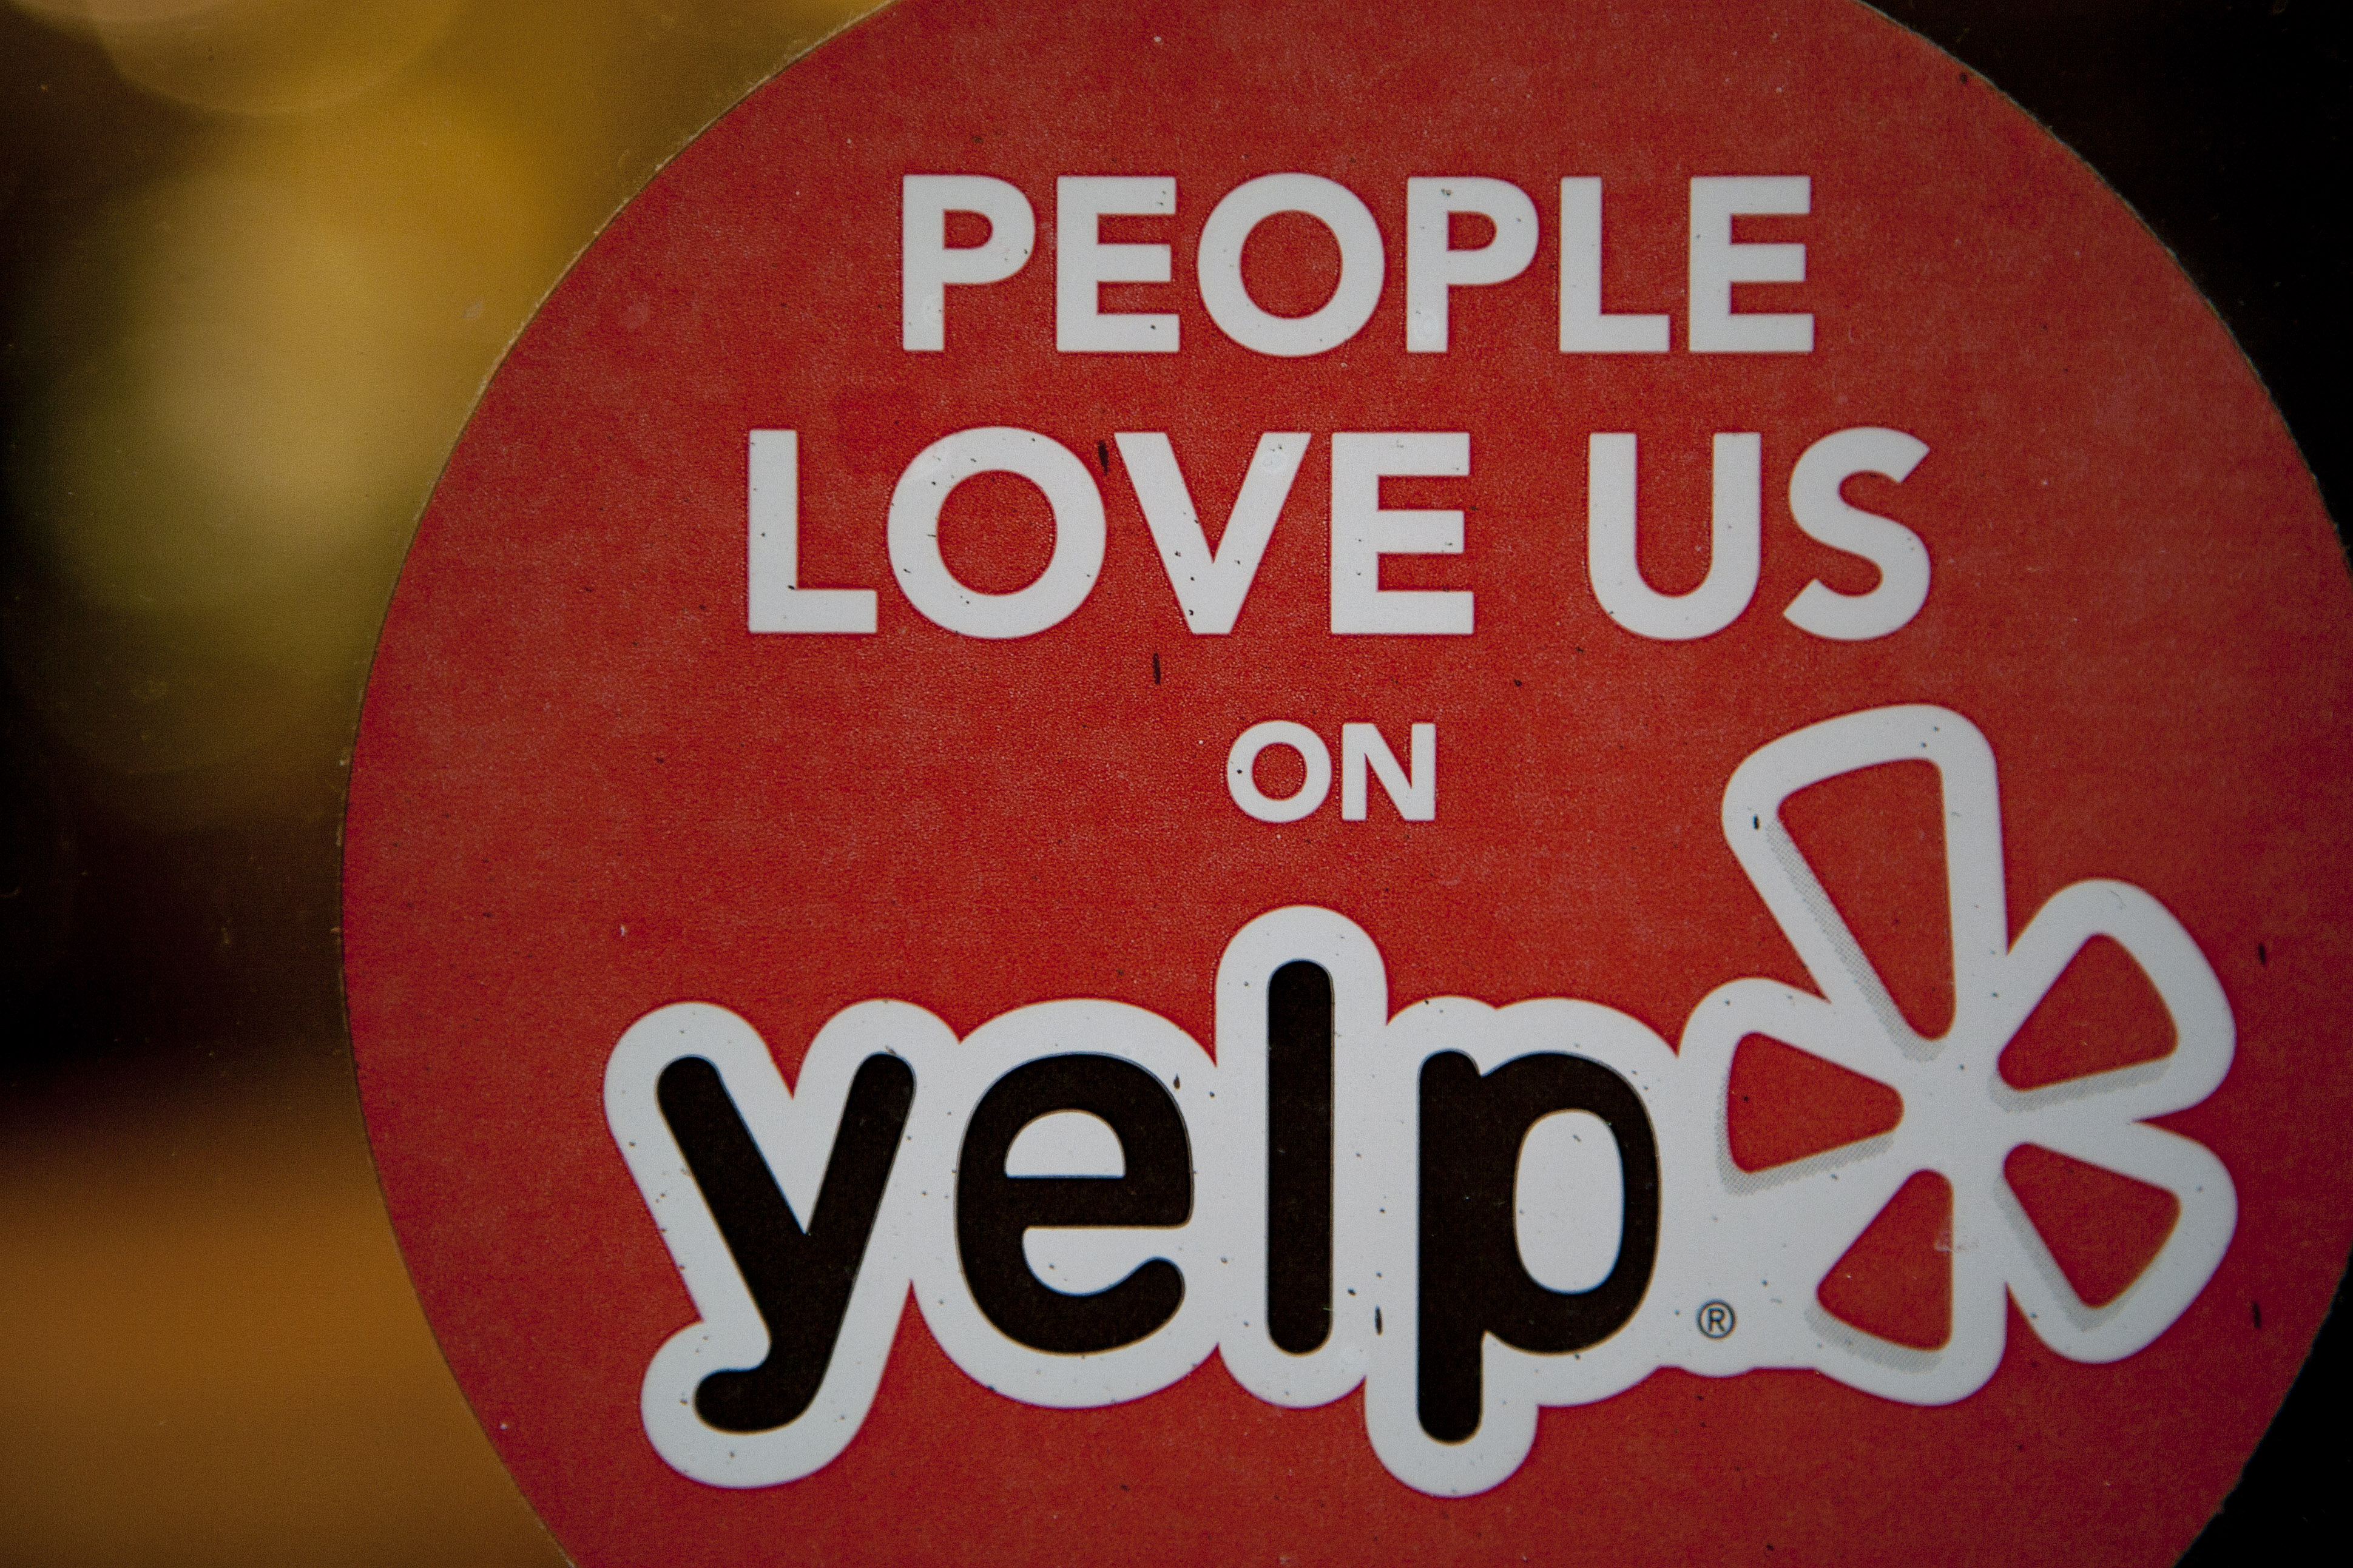 The Yelp logo is displayed in the window of a restaurant in New York on March 1, 2012. (Scott Eells—Bloomberg via Getty Images)